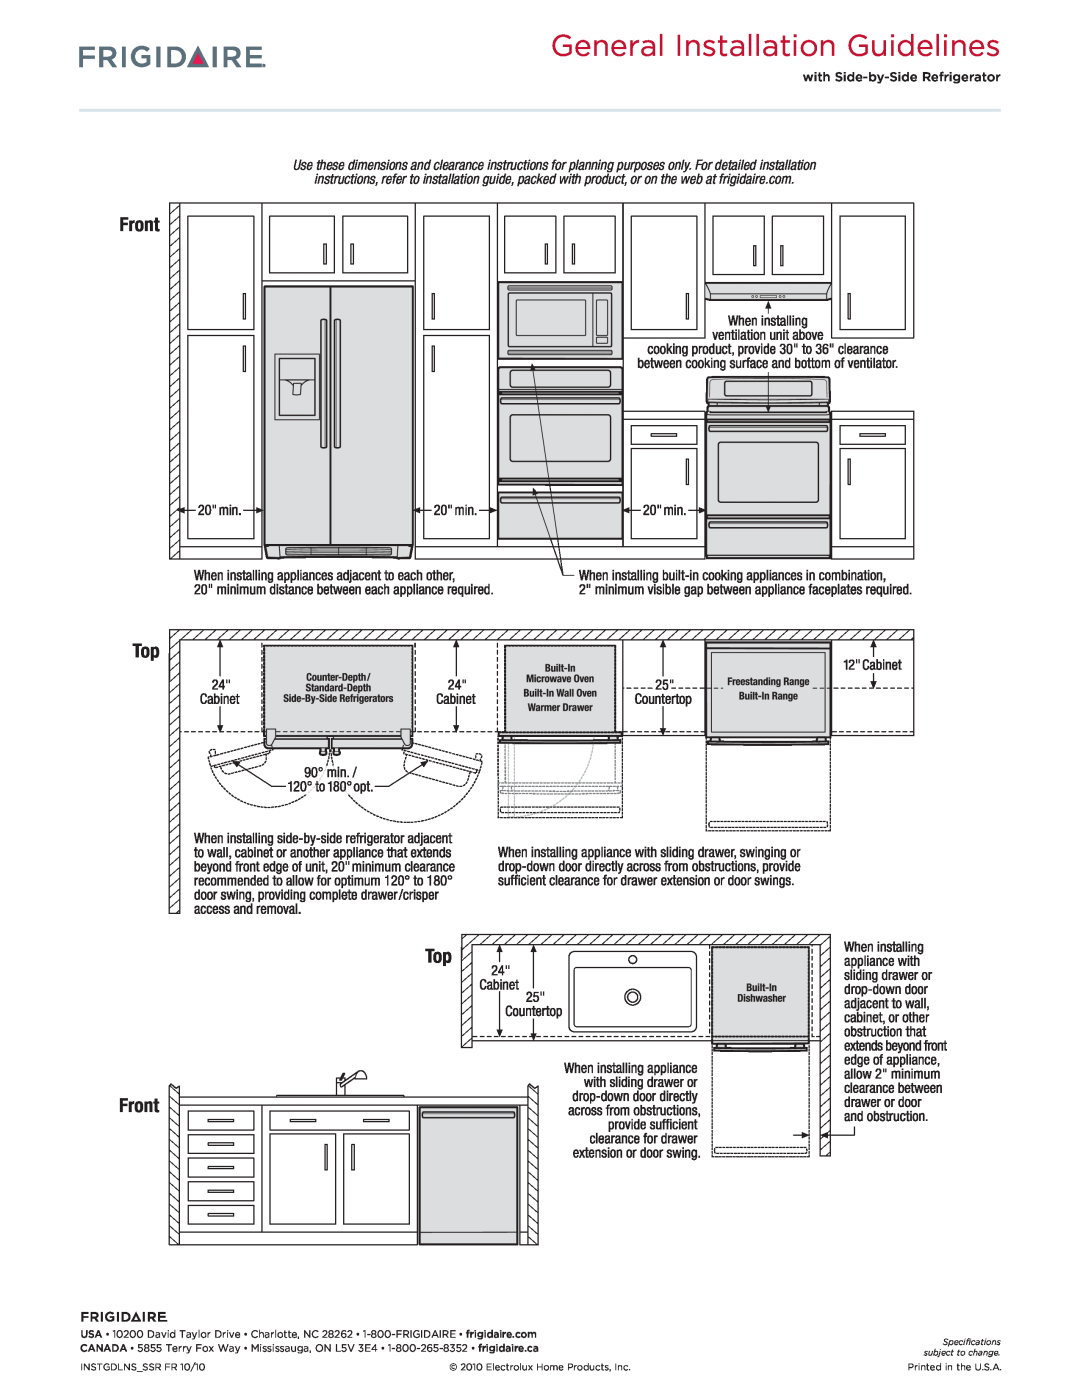 Frigidaire FGET3065K dimensions General Installation Guidelines, Top Front 